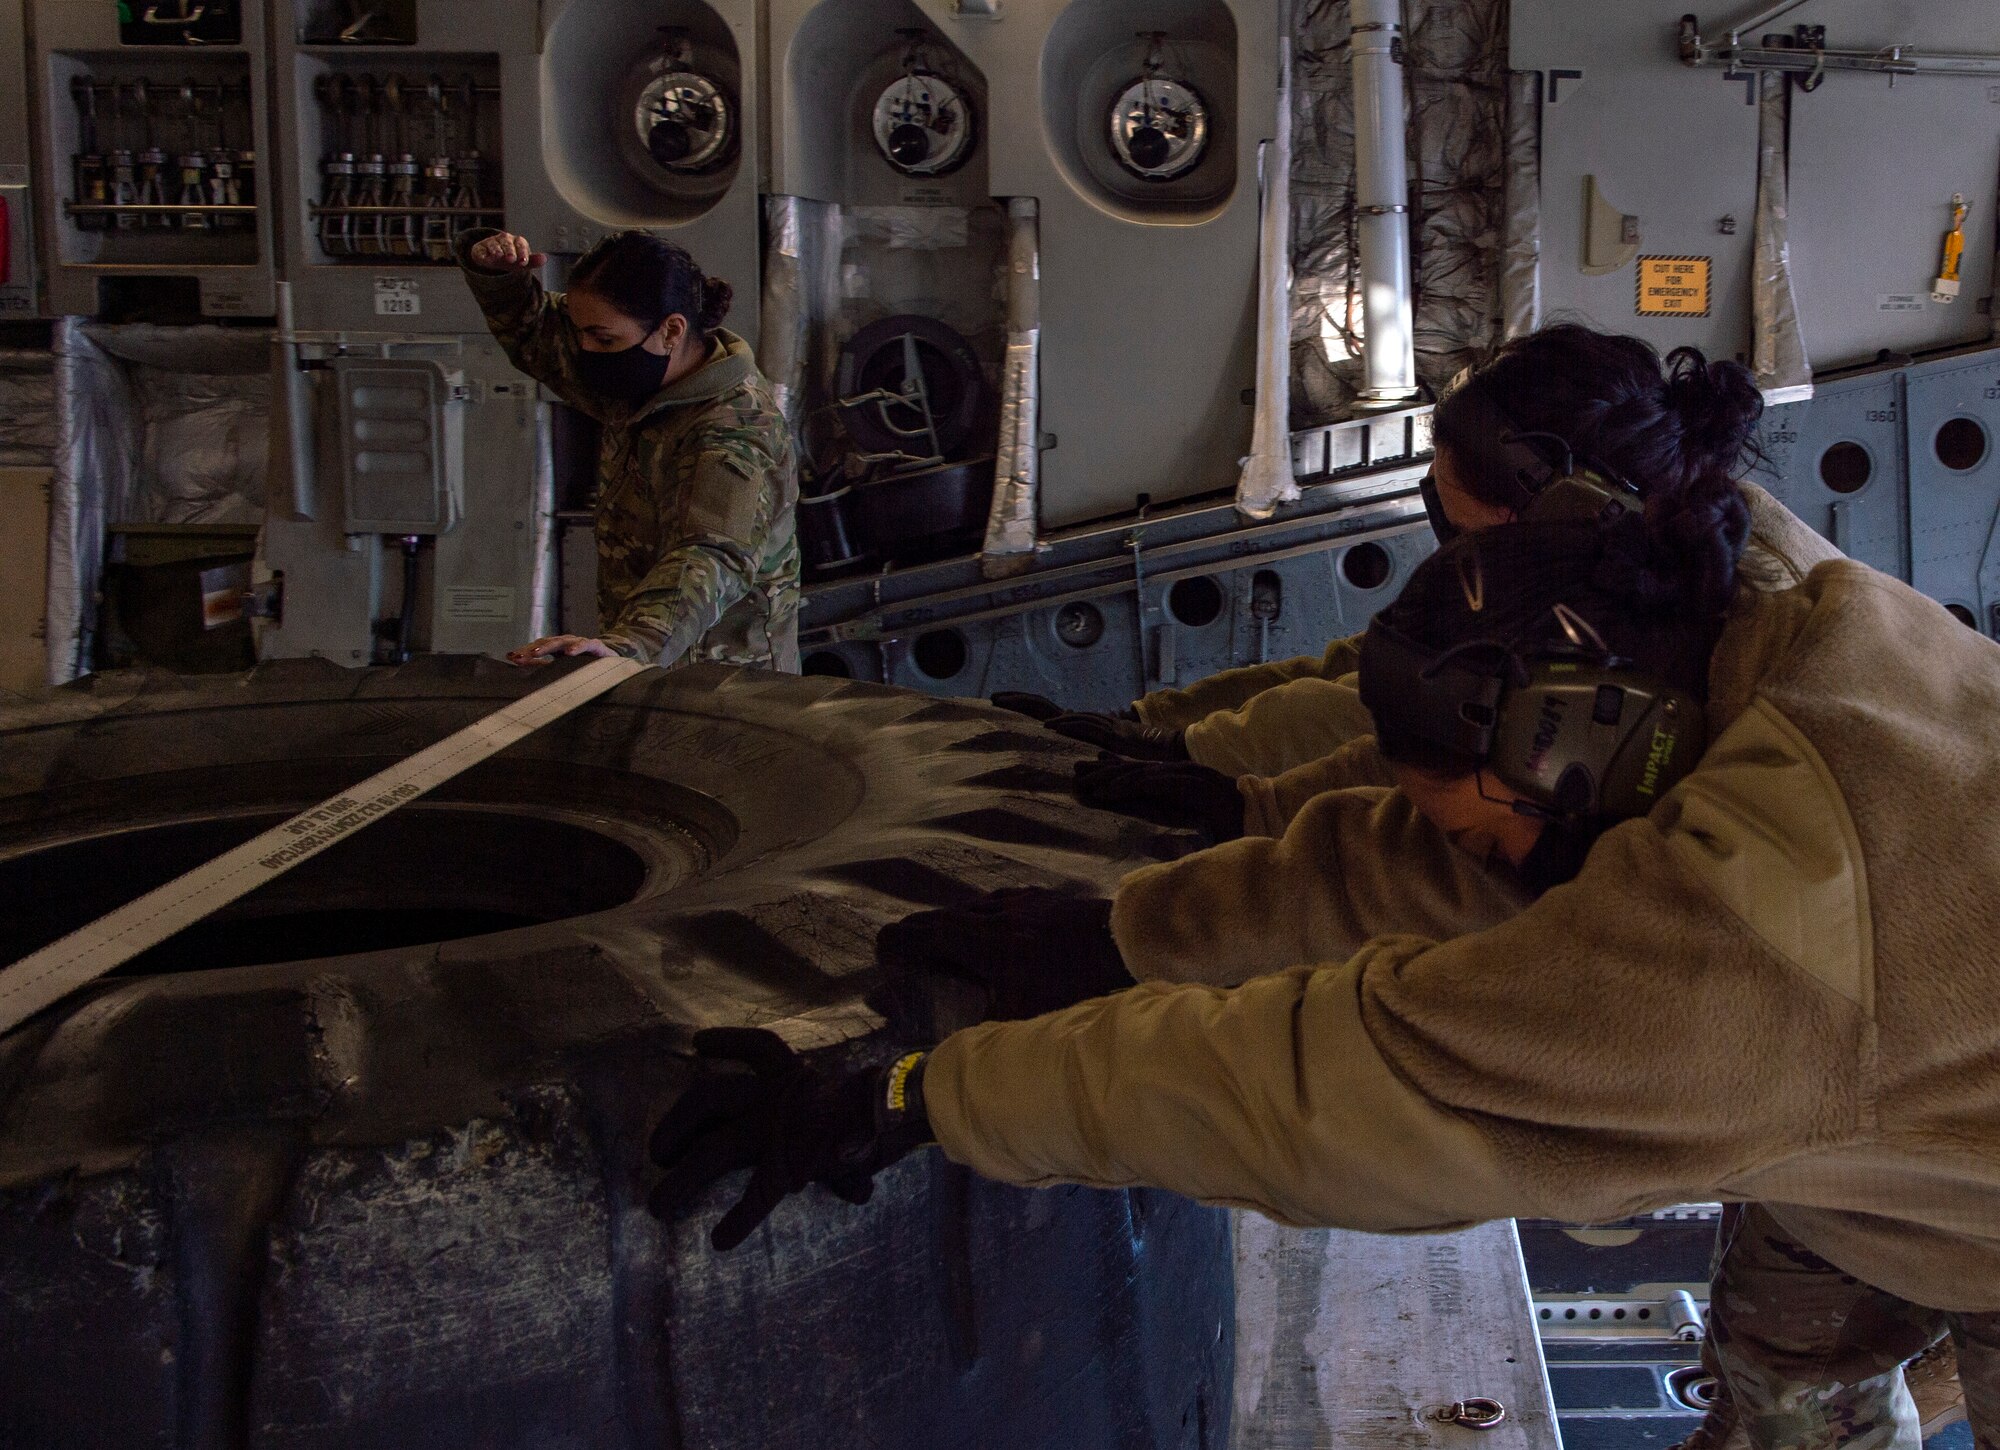 U.S. Air Force Tech. Sgt. Jaideep Kaur, left, 7th Airlift Squadron Operations Flight flight chief, alongside other 62nd Aerial Port Squadron Airmen, load a combat pallet onto a C-17 Globemaster III at Joint Base Lewis-McChord, Washington, Dec. 14, 2020. Kaur and other Team McChord Airmen comprised an all-female crew who prepared, launched and executed a flight-training mission. (U.S. Air Force photo by Senior Airman Tryphena Mayhugh)